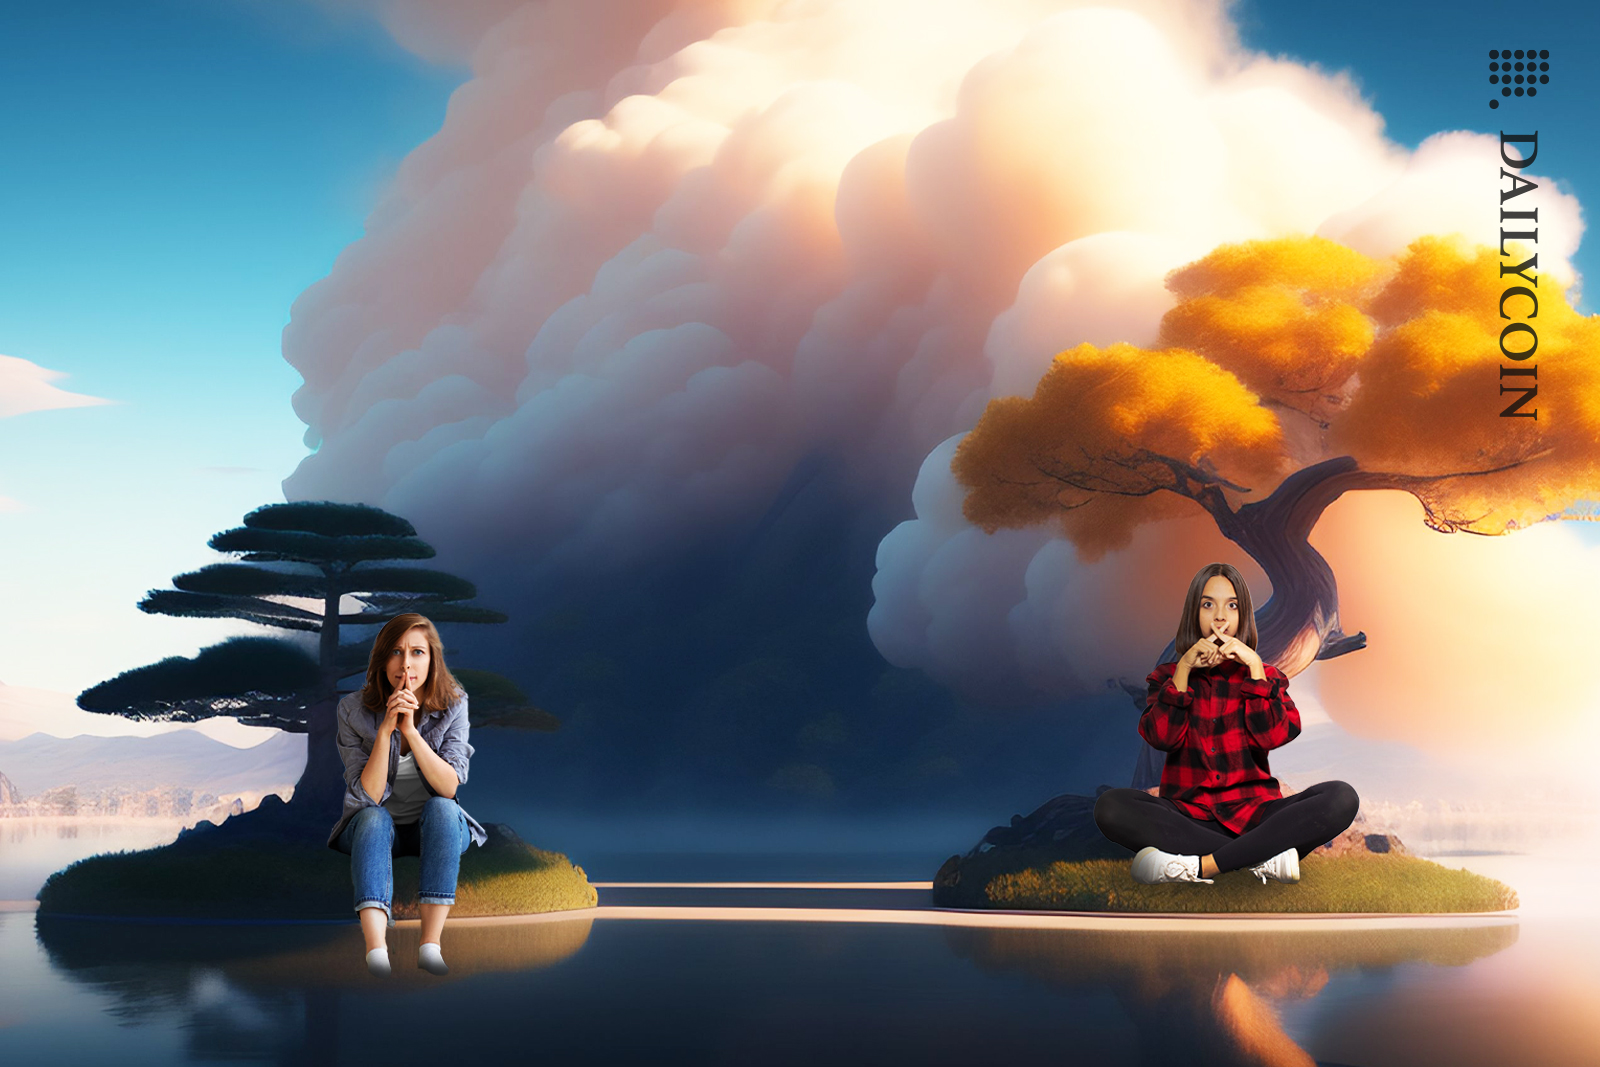 Two islands with trees on the right a bigger tree with yellow leaves and a girl sitting showing X with fingers by the mouth. Island on the left- Girl with feet in the water both fingers to the mouth. Smoke in the background.